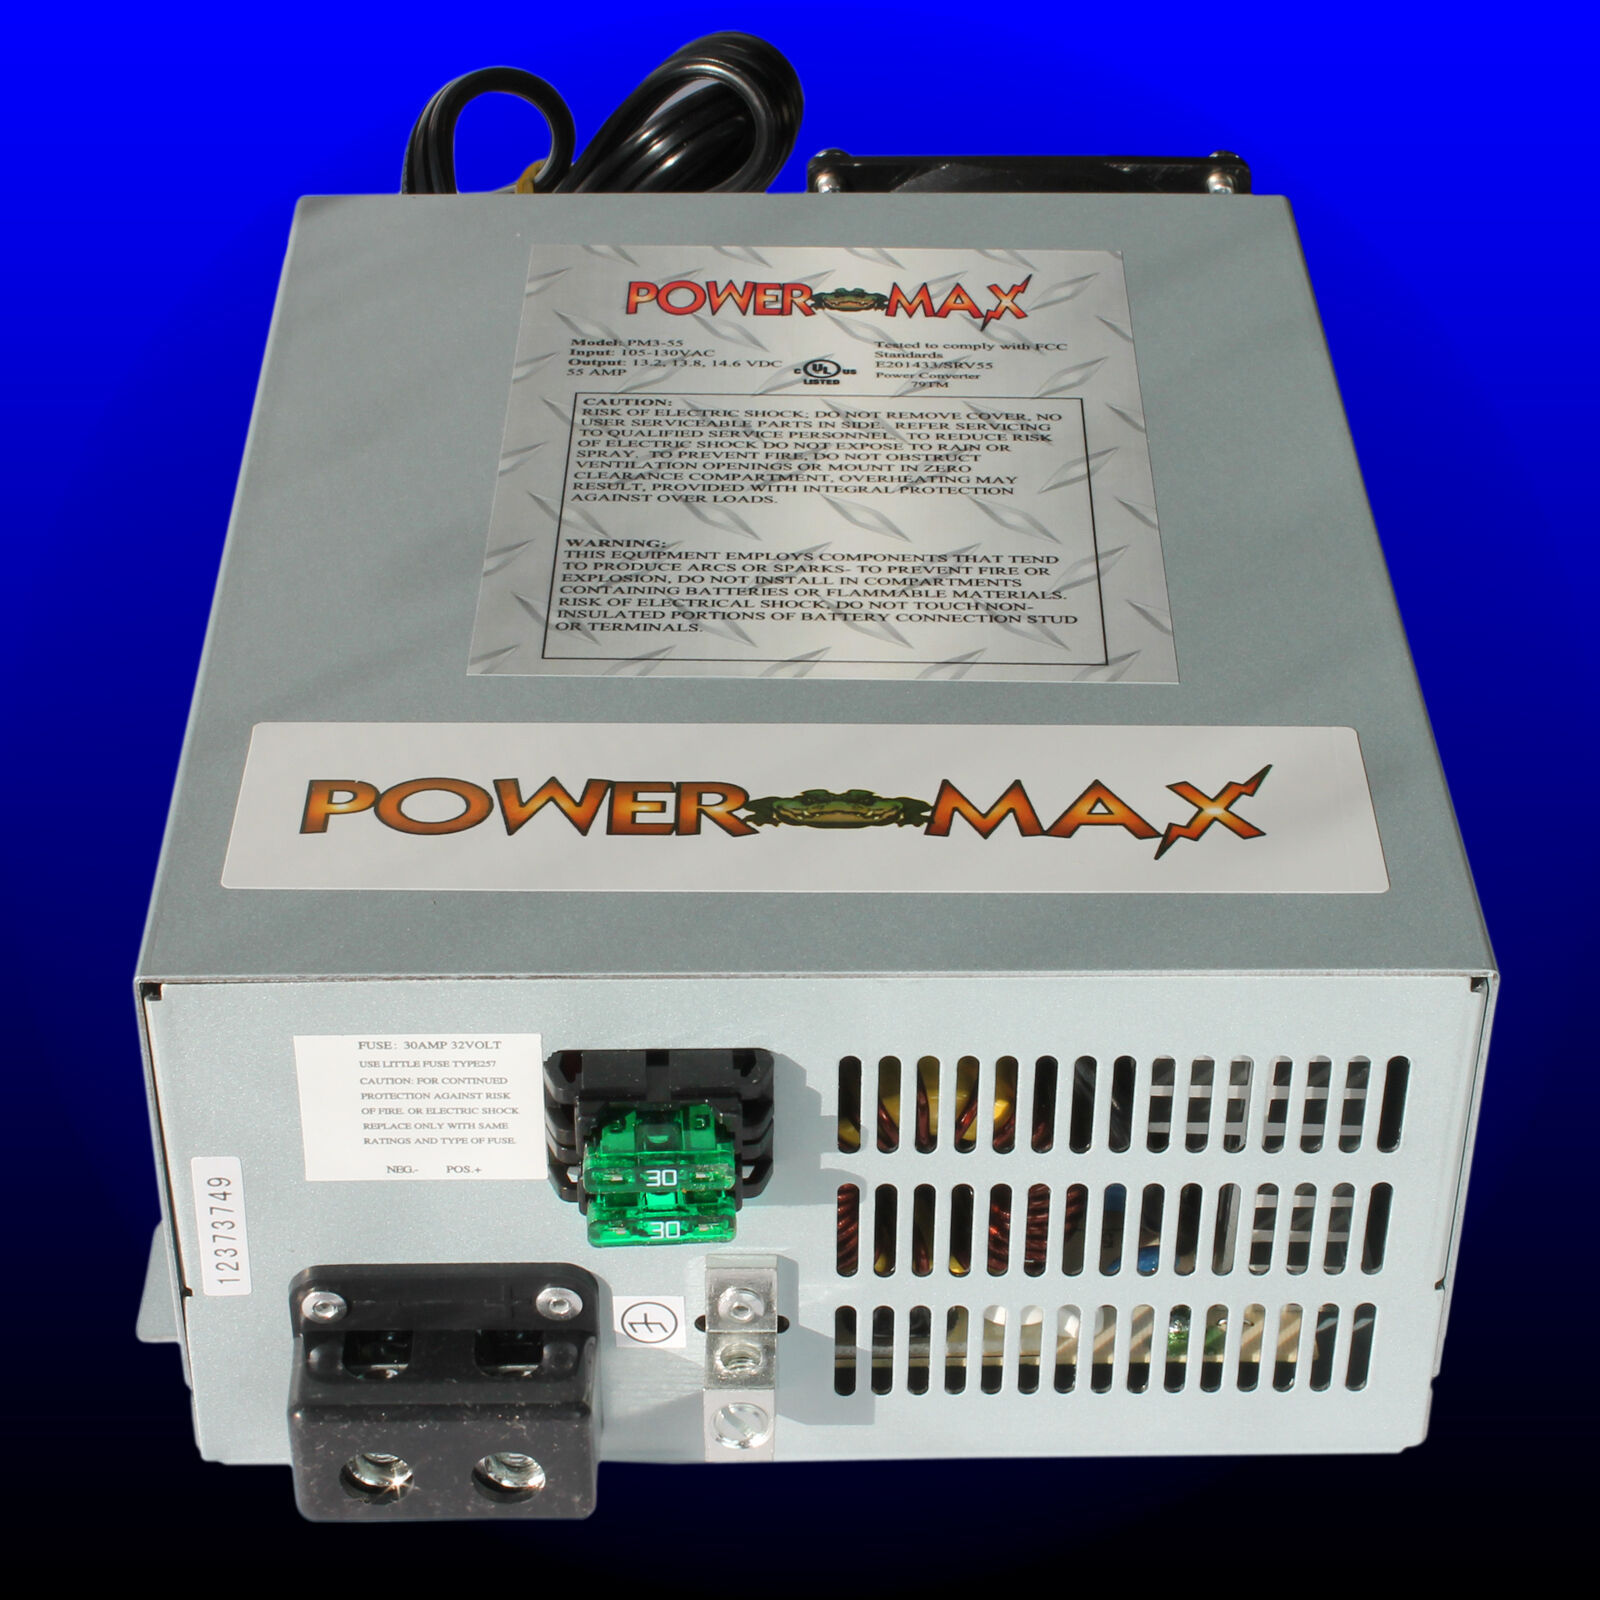 Power Max RV Converter Battery Charger PM3-55 AMP 120 V AC to 12 volt DC Supply